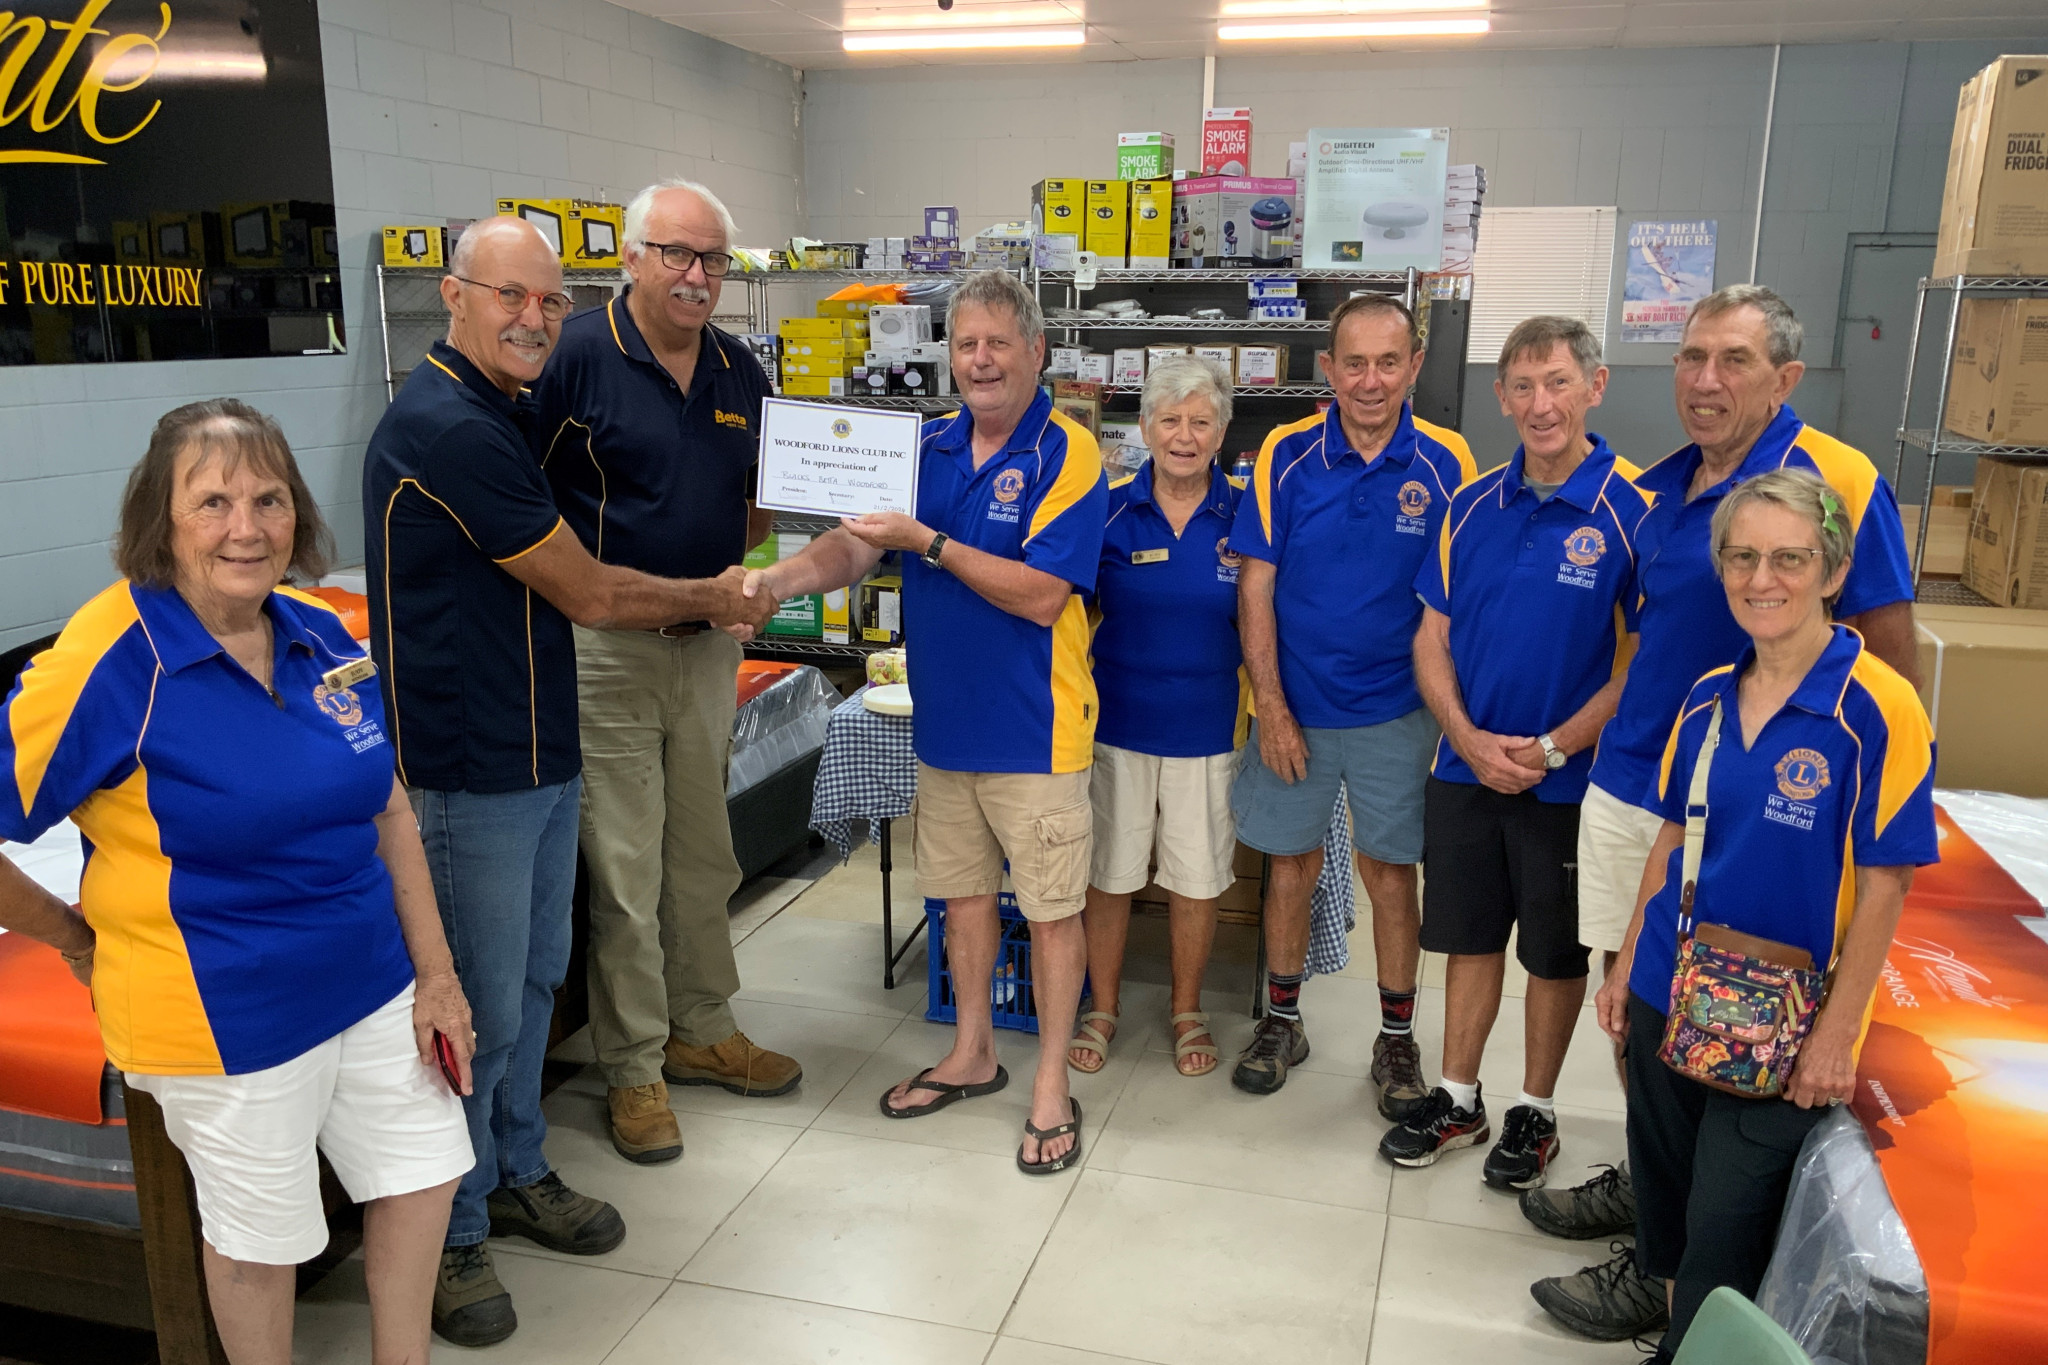 Woodford Lions Club president David Kearns hands a certificate to Blacks Betta Home Living owners Barry and Jeff Black, with other Woodford Lions members in attendance.